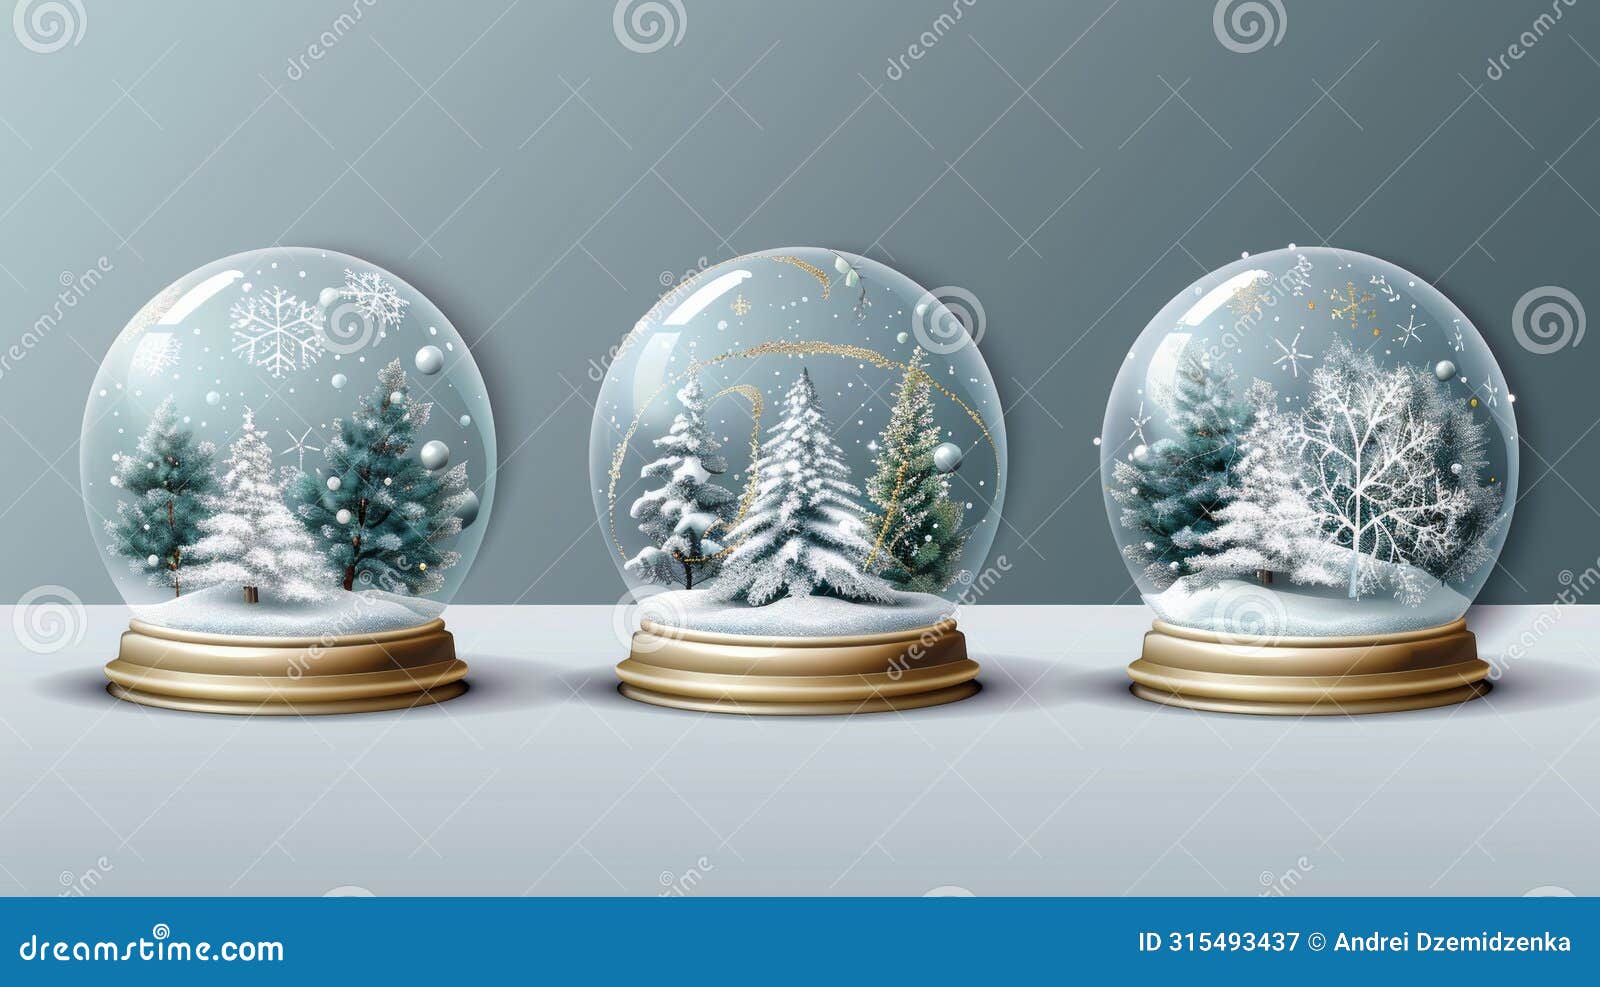 crystal semisphere containers,  silver and gold bases. festive xmas gift mockup. a collection of realistic 3d